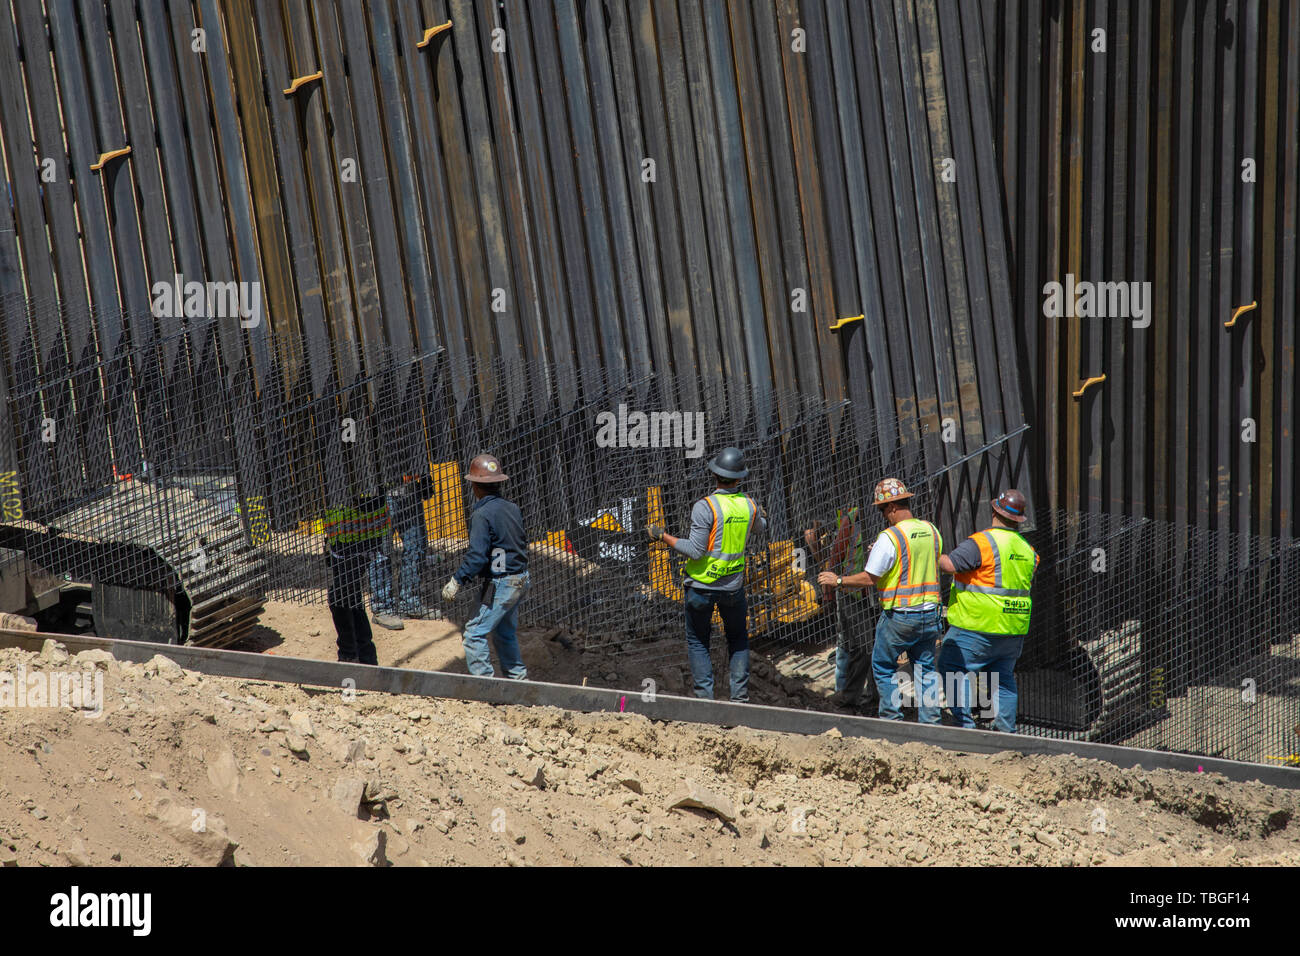 Workers set into place a section of border fence near El Paso, Texas, part of the privately-funded scheme by We Build The Wall, Inc. 30 May 2019 Stock Photo